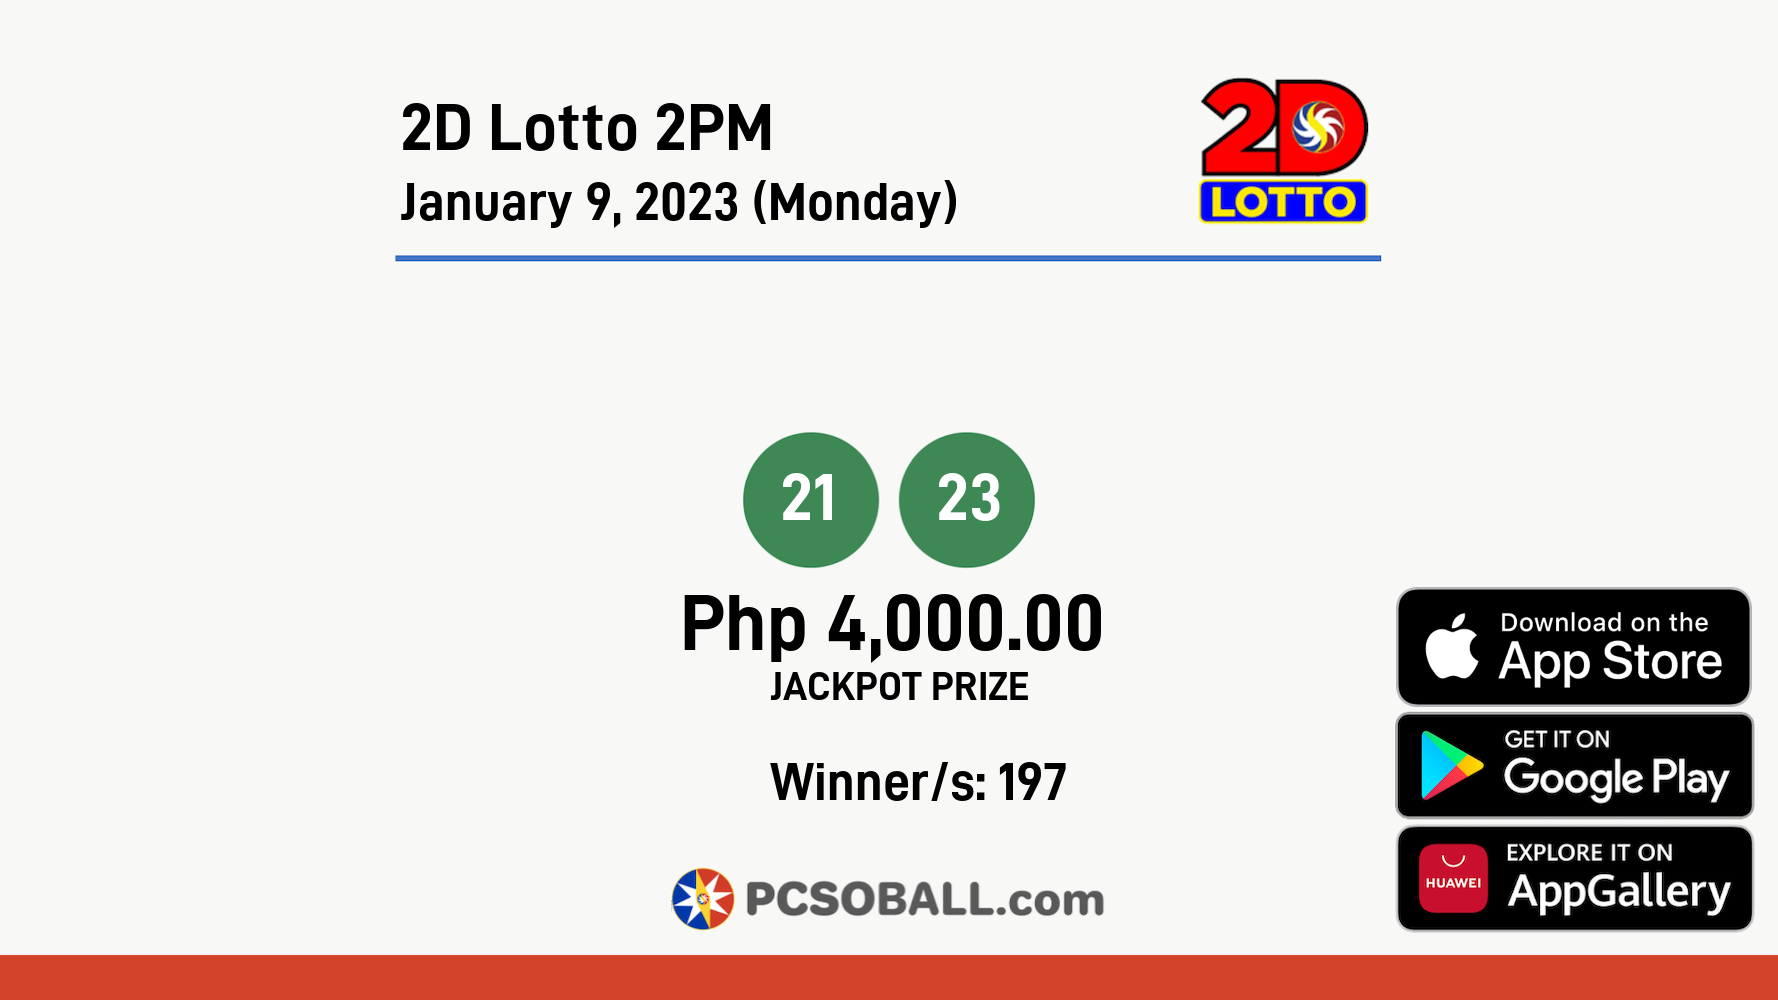 2D Lotto 2PM January 9, 2023 (Monday) Result